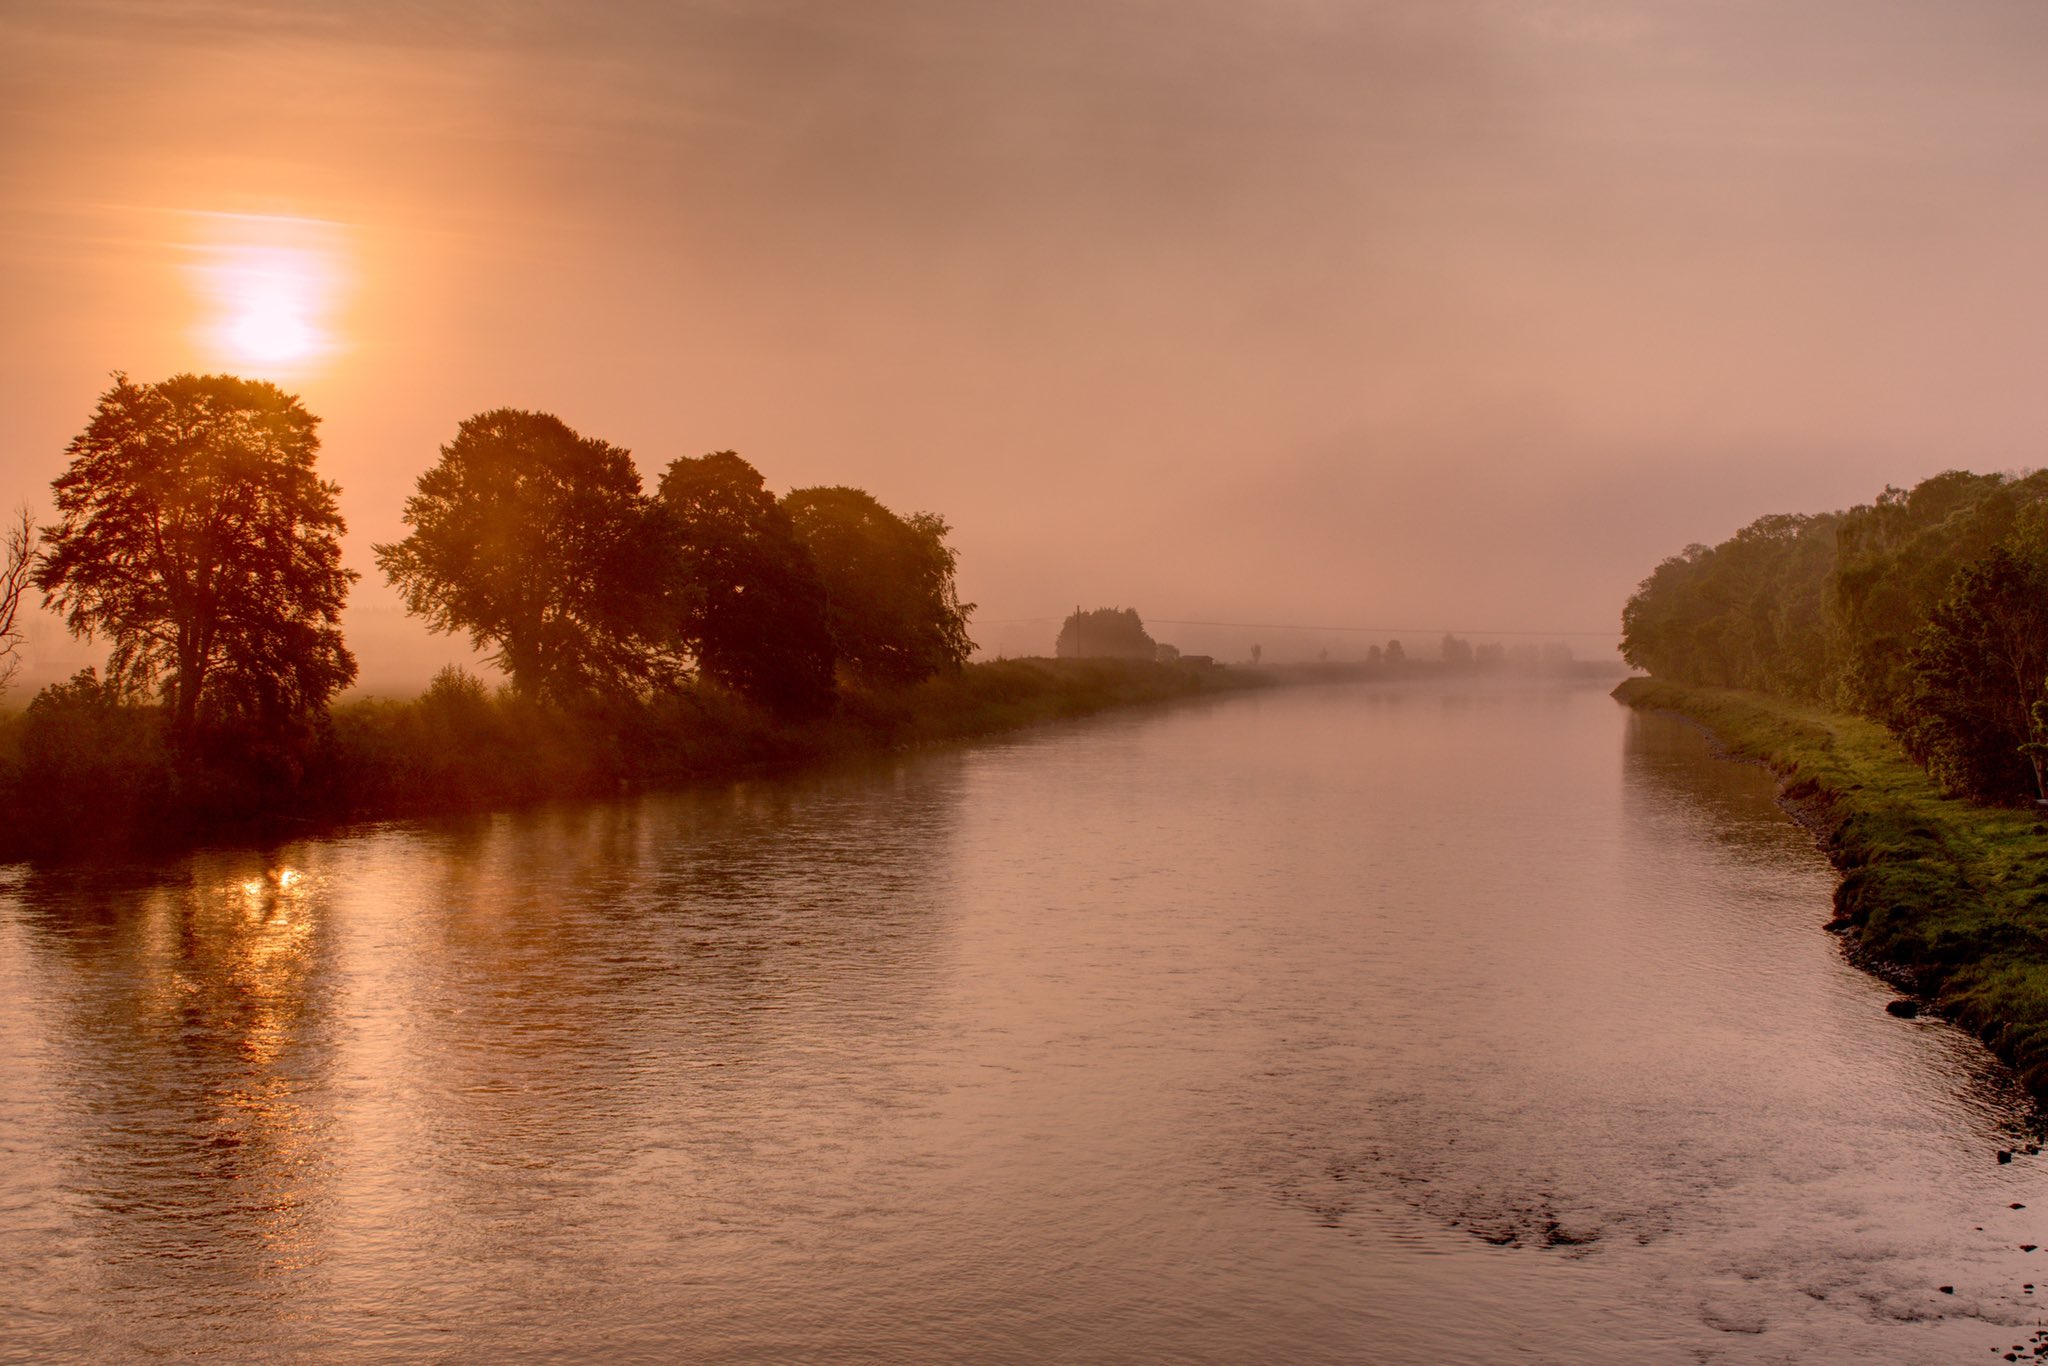 3rd Place A misty early morning over the River Tay by Roy Jacobs @woodiechef